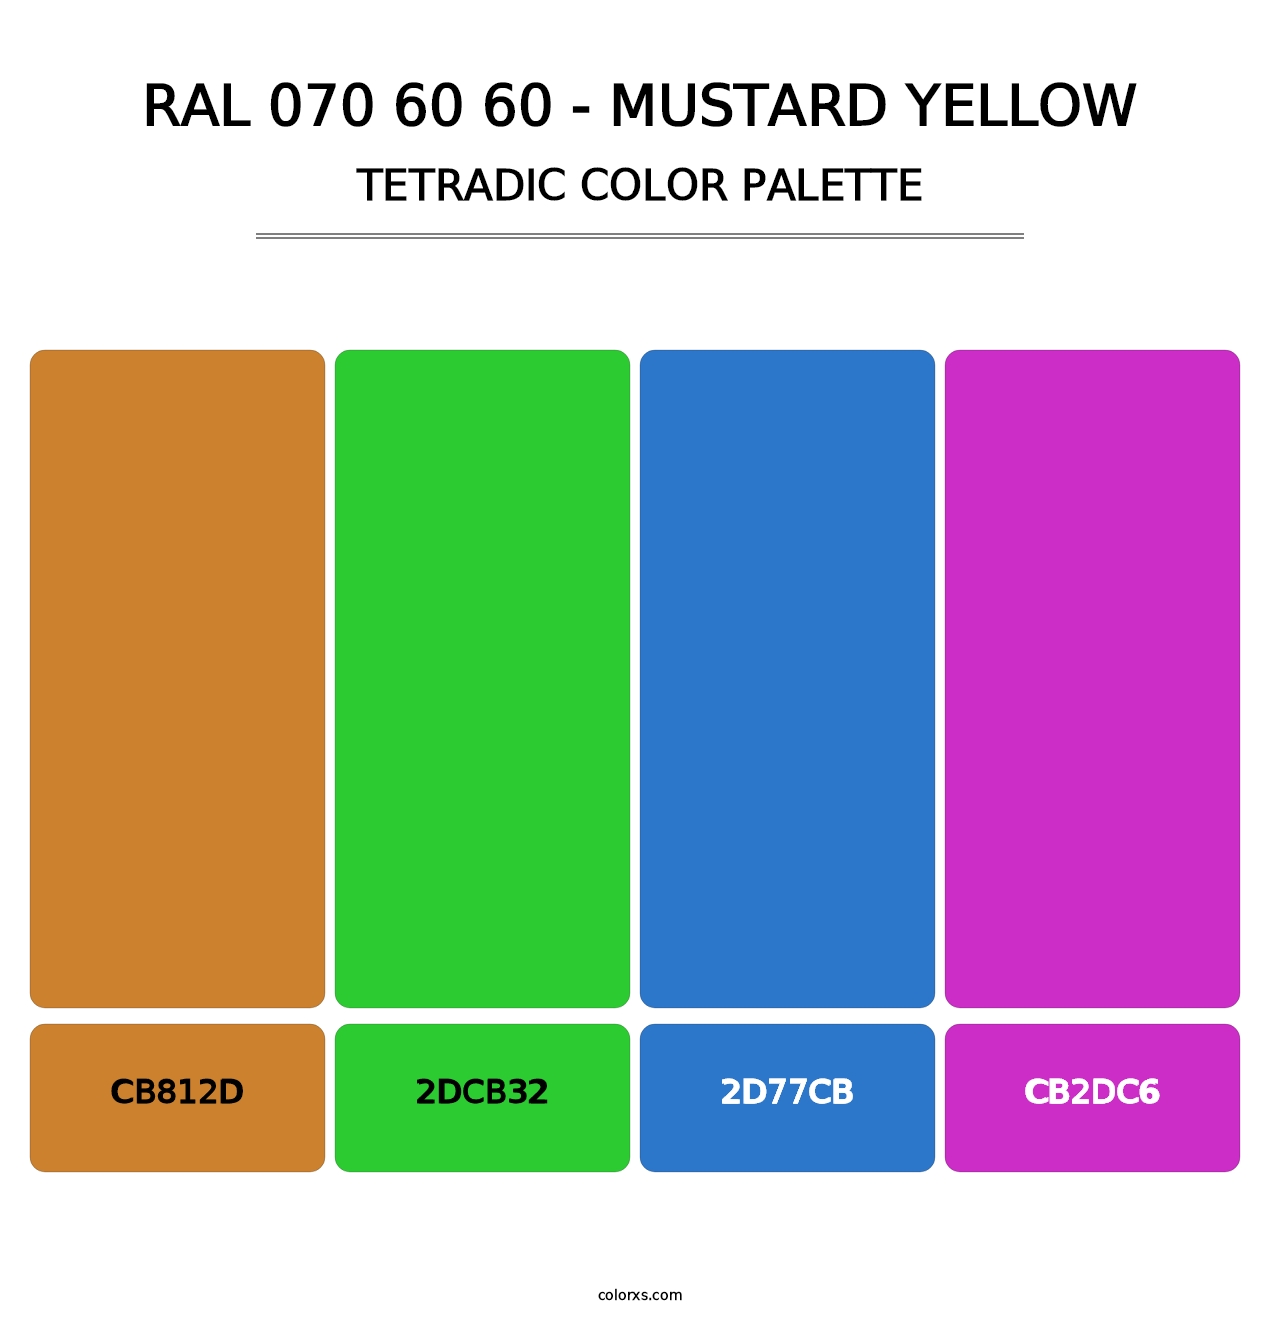 RAL 070 60 60 - Mustard Yellow - Tetradic Color Palette